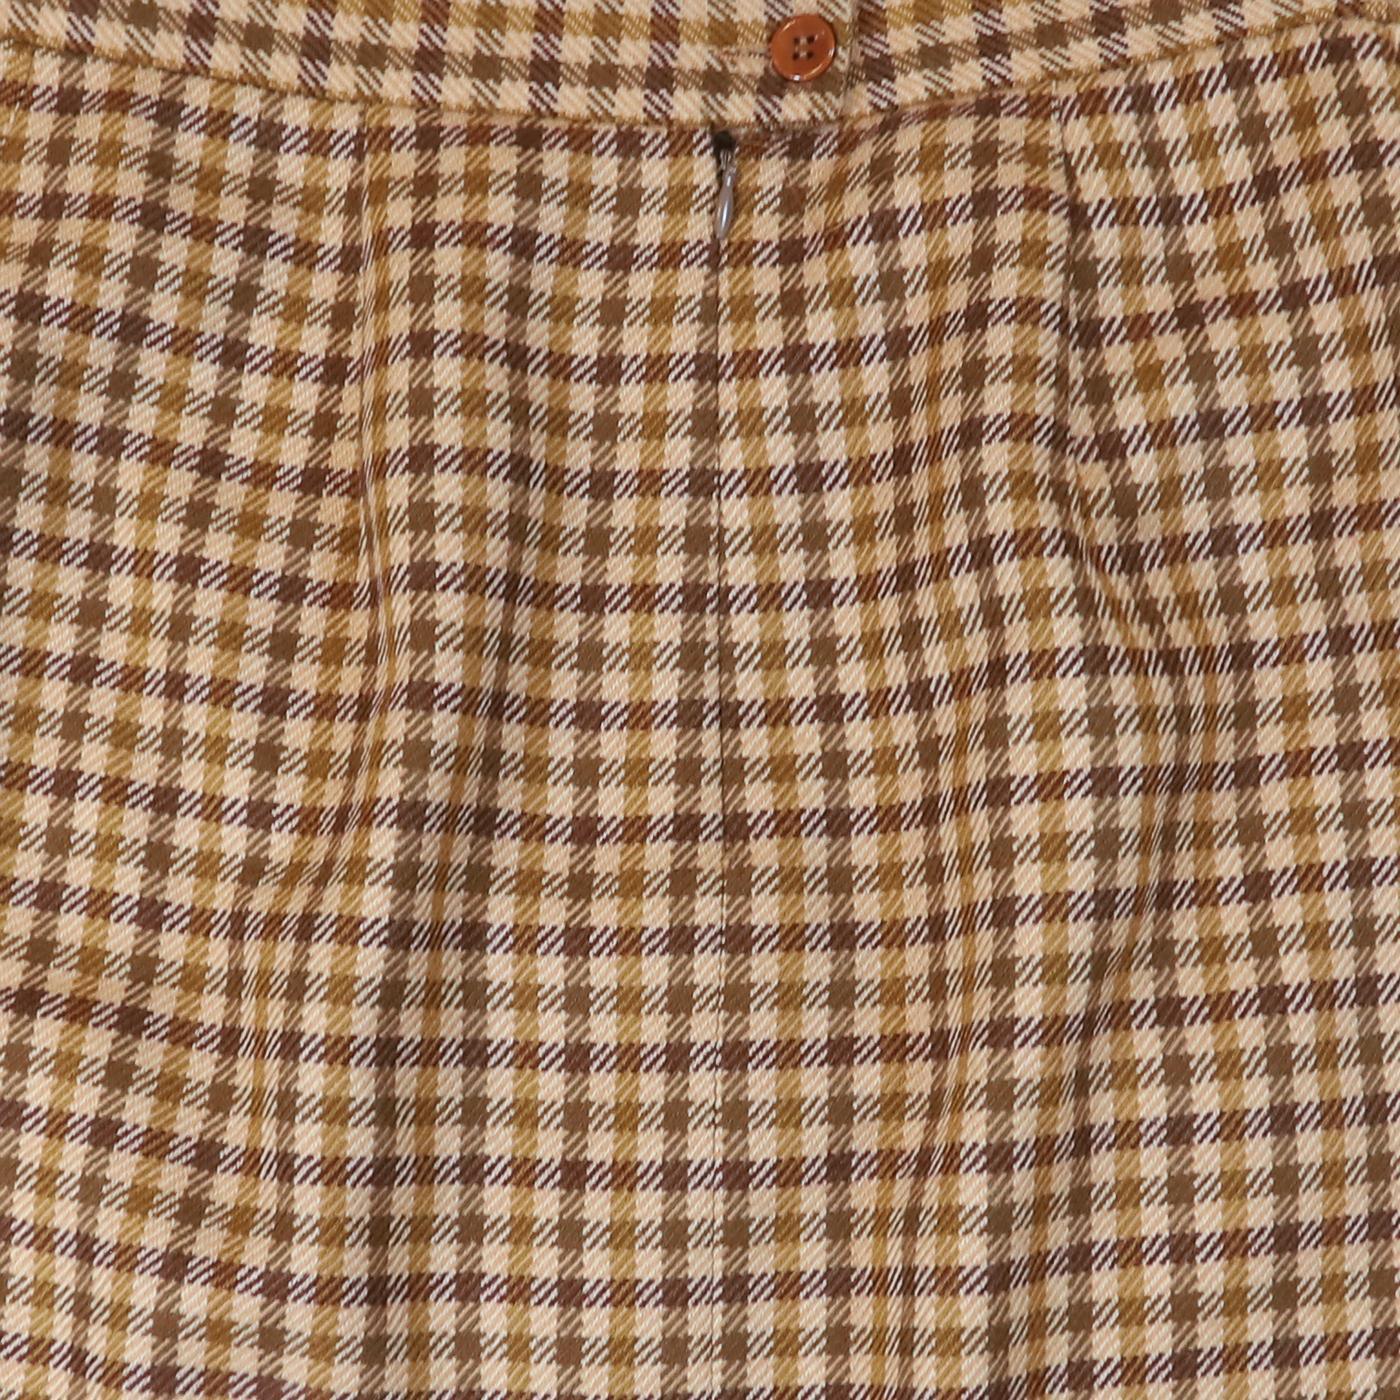 Vintage Skirt - 26" x 21" - Known Source